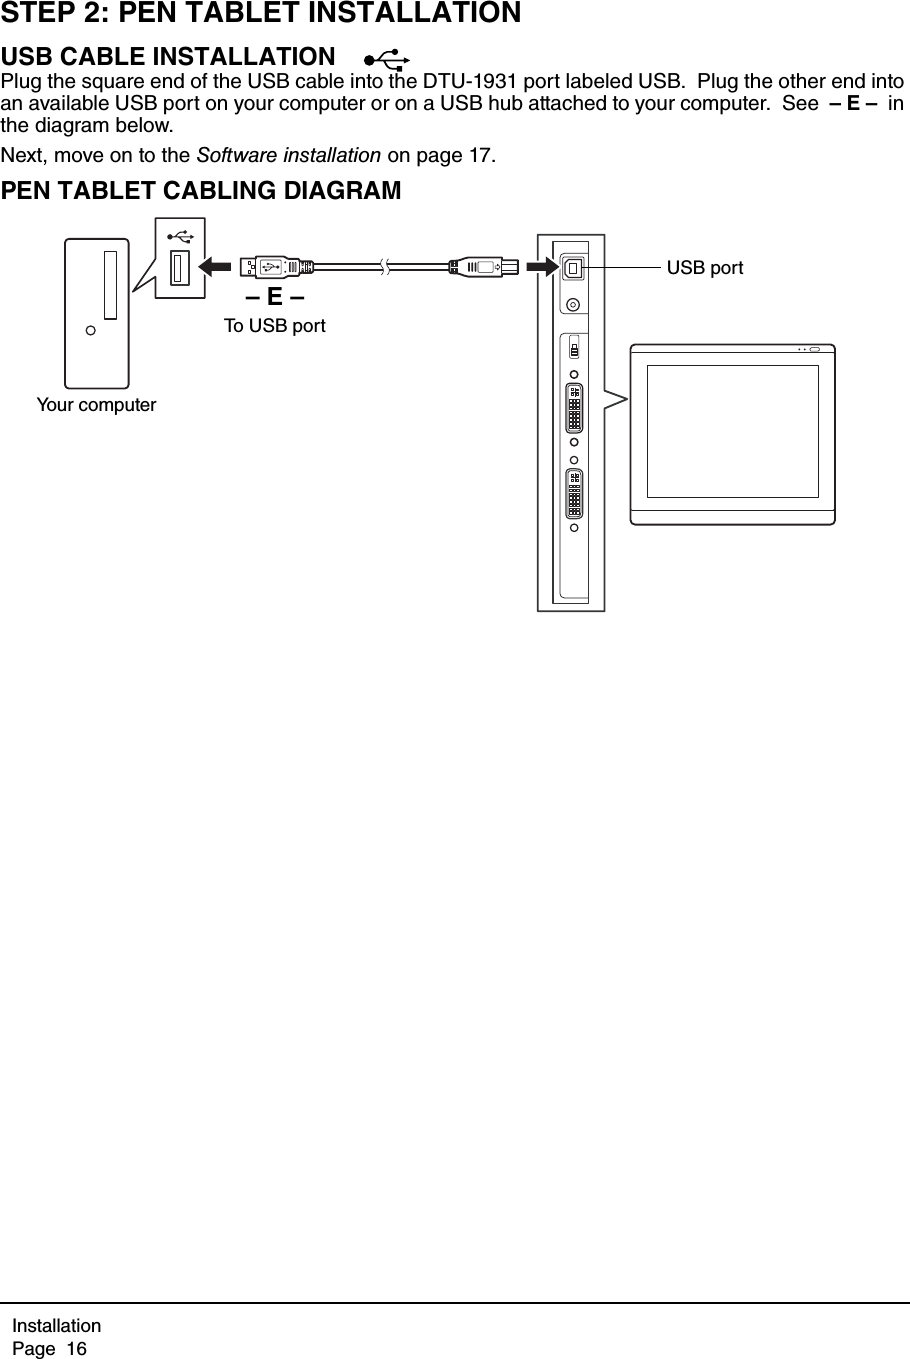 InstallationPage  16STEP 2: PEN TABLET INSTALLATIONUSB CABLE INSTALLATIONPlug the square end of the USB cable into the DTU-1931 port labeled USB.  Plug the other end into an available USB port on your computer or on a USB hub attached to your computer.  See  – E –  in the diagram below.Next, move on to the Software installation on page 17.PEN TABLET CABLING DIAGRAM– E –To USB portYour computerUSB port